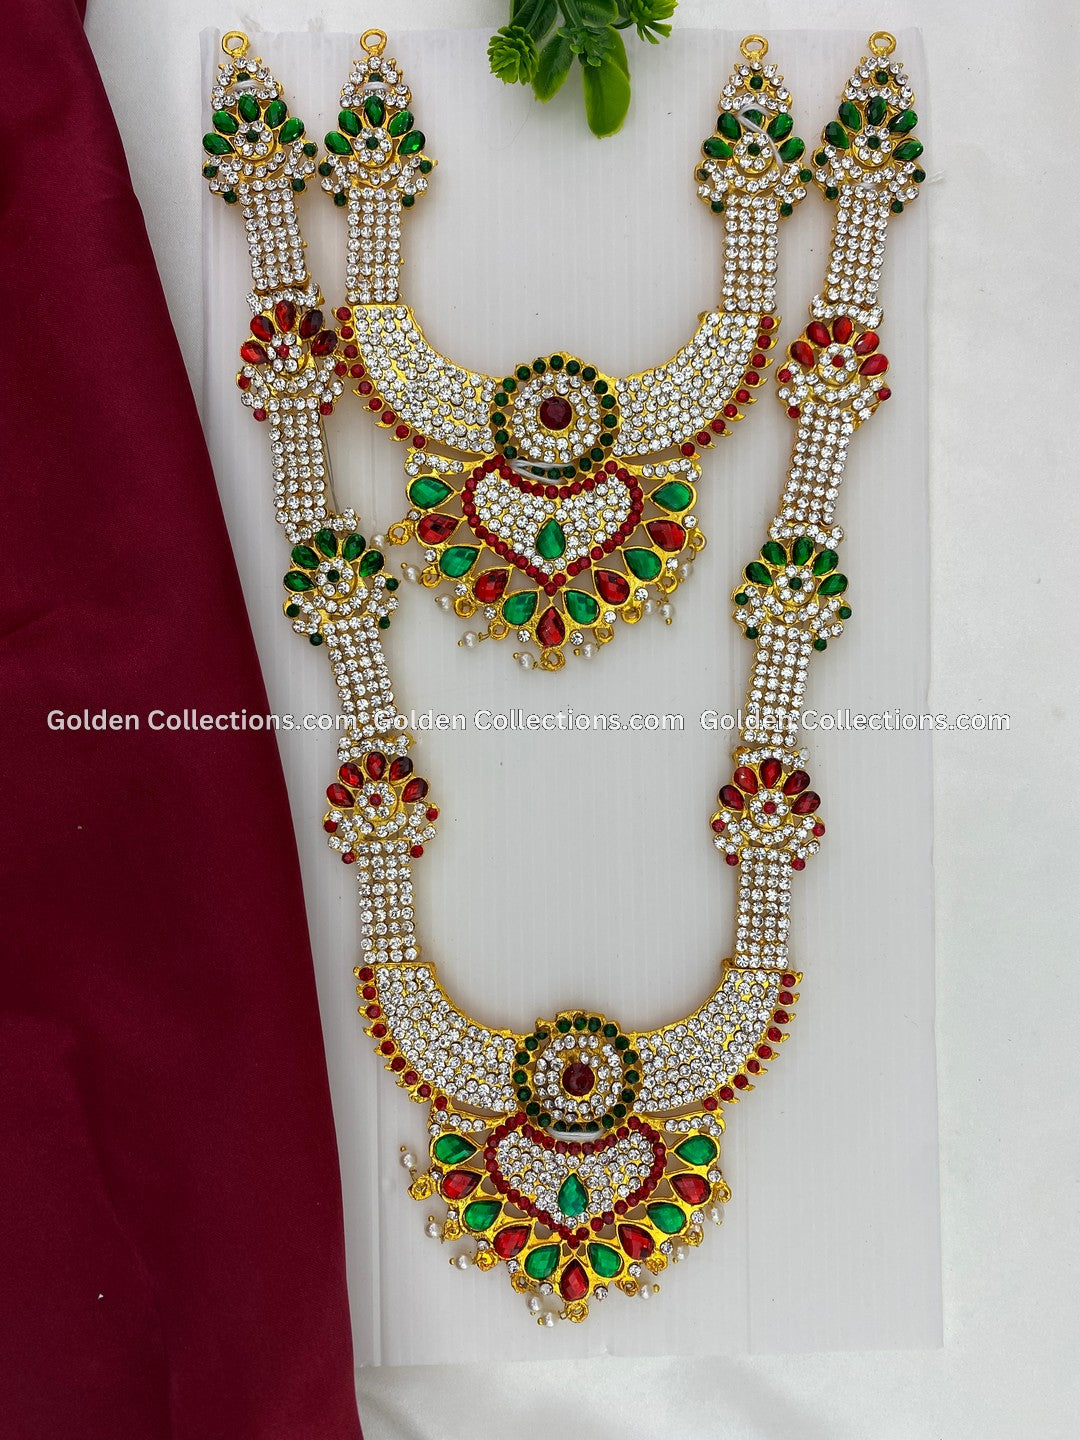 Temple Deity Long Necklace - Divine Opulence - GoldenCollections